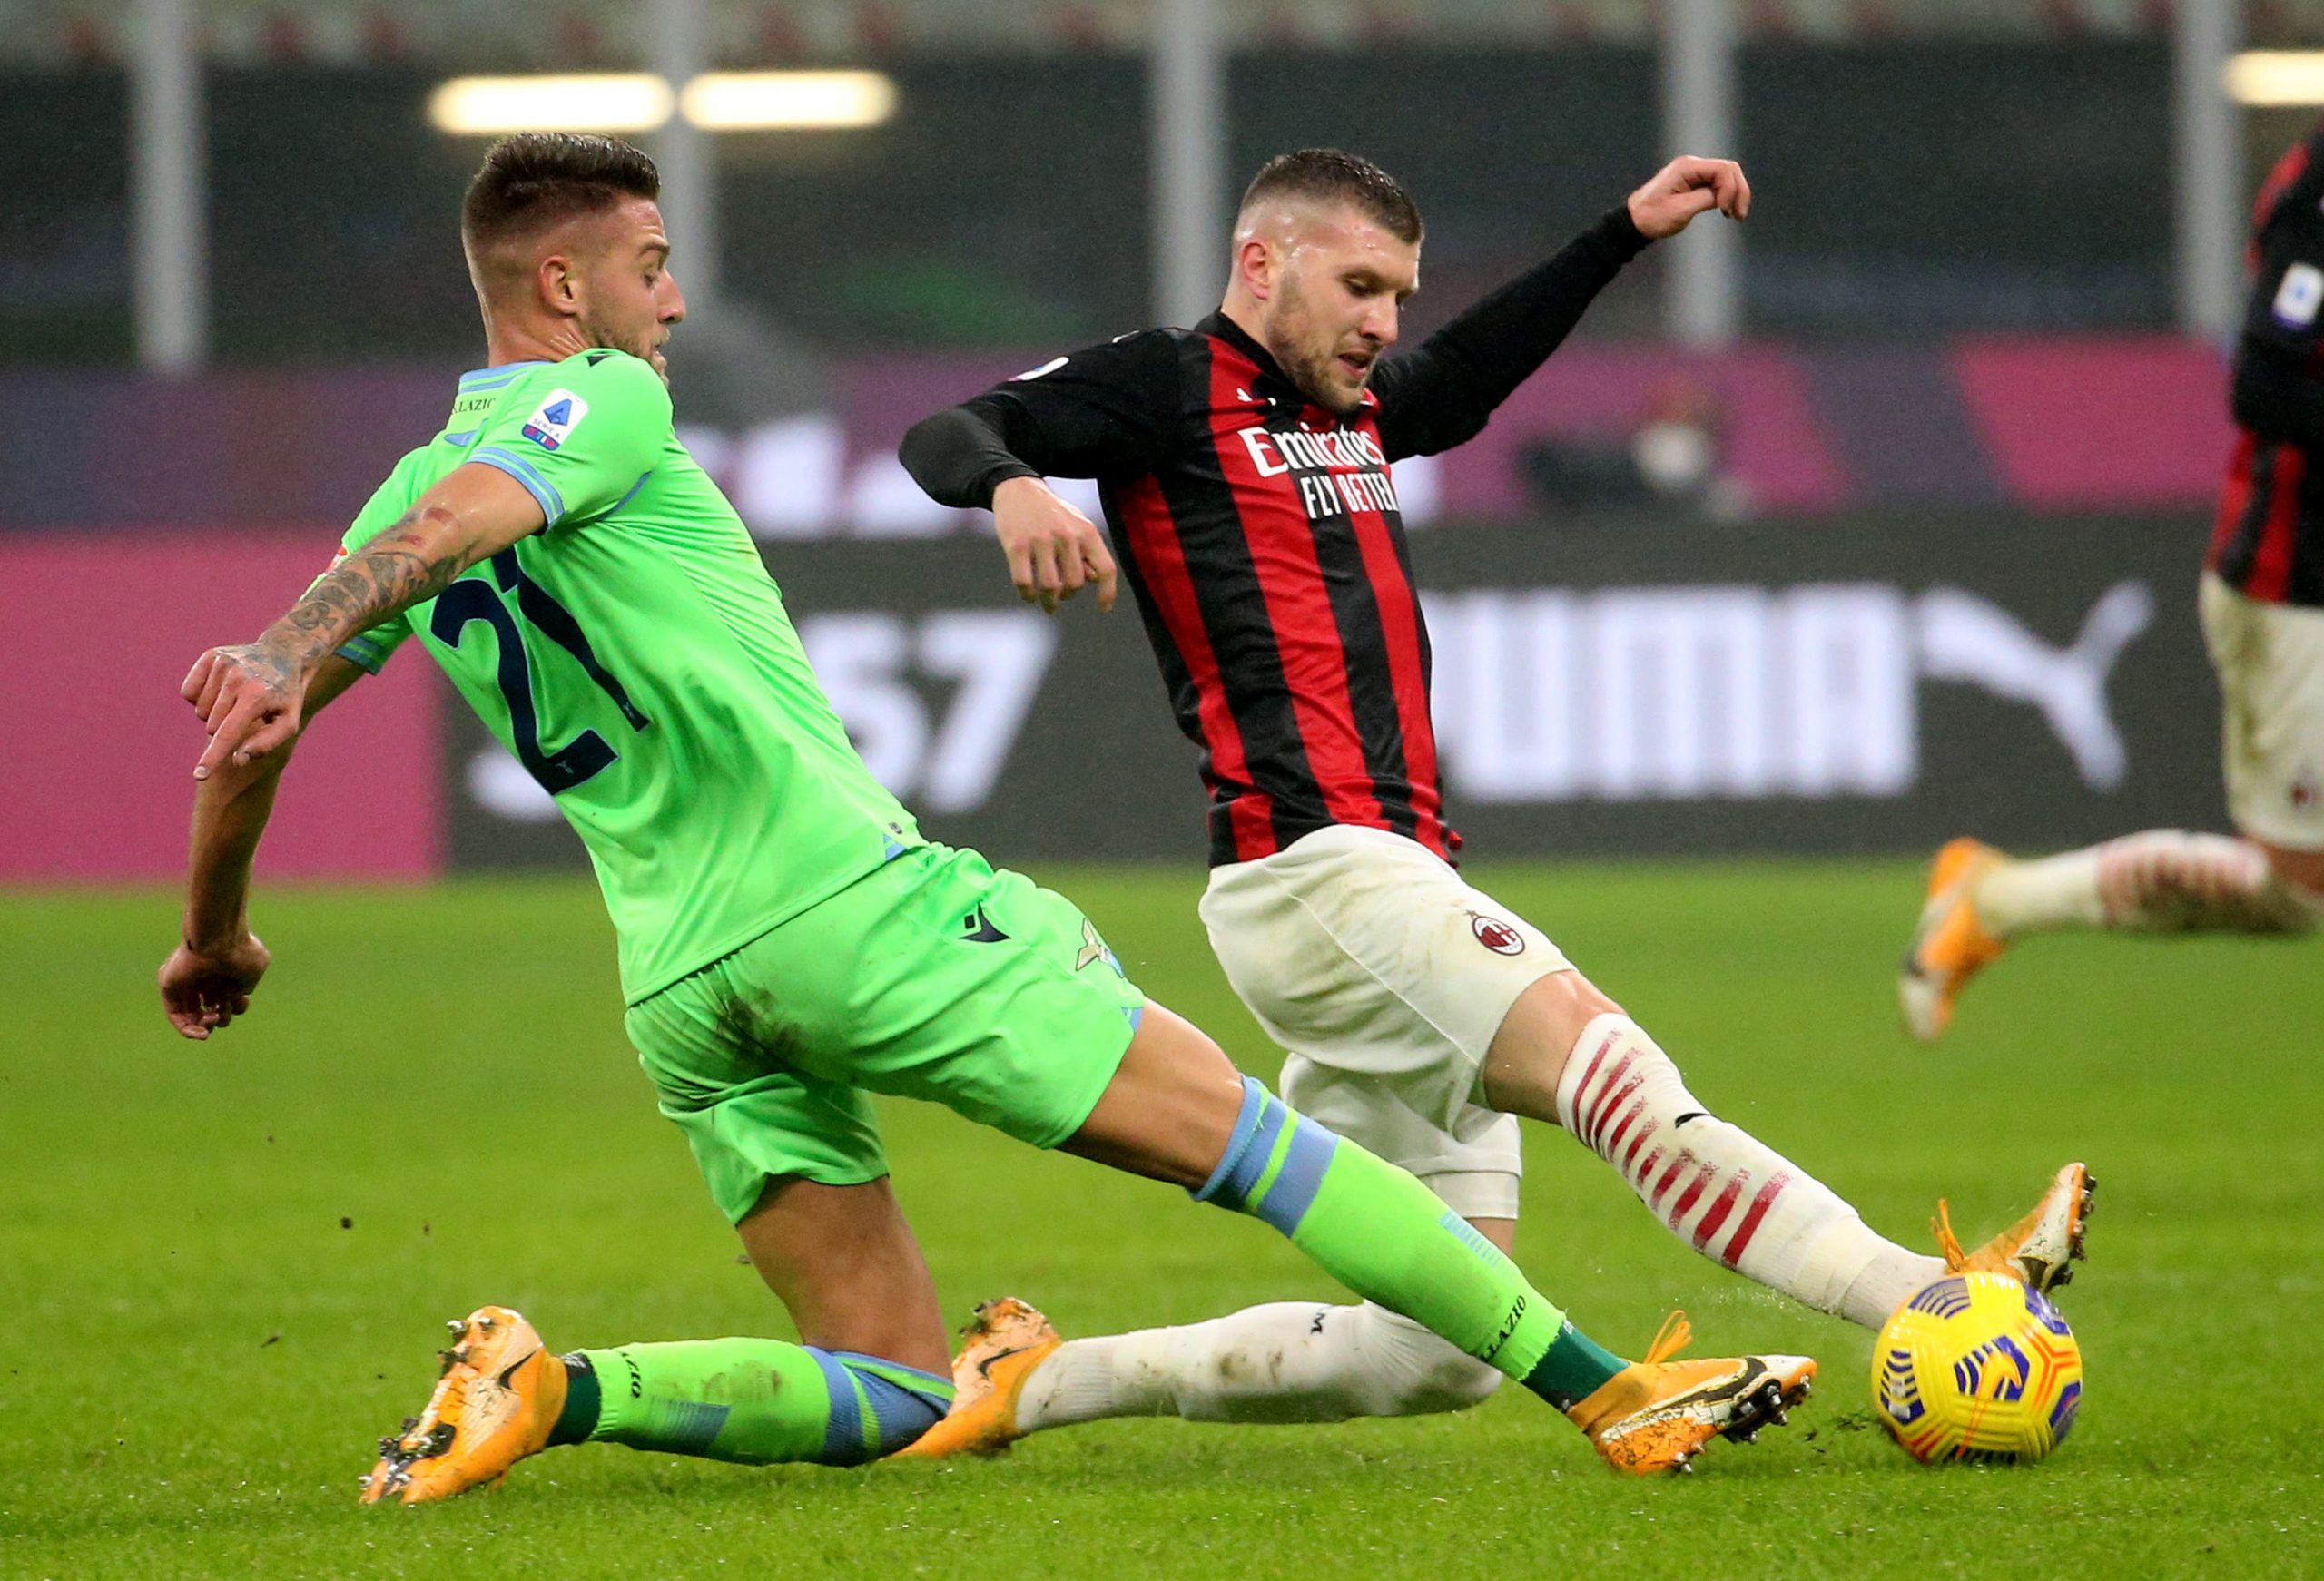 epa08901637 AC Milan's Ante Rebic (R) in action during the Italian Serie A soccer match between AC Milan and SS Lazio at Giuseppe Meazza stadium in Milan, Italy, 23 December 2020.  EPA/MATTEO BAZZI